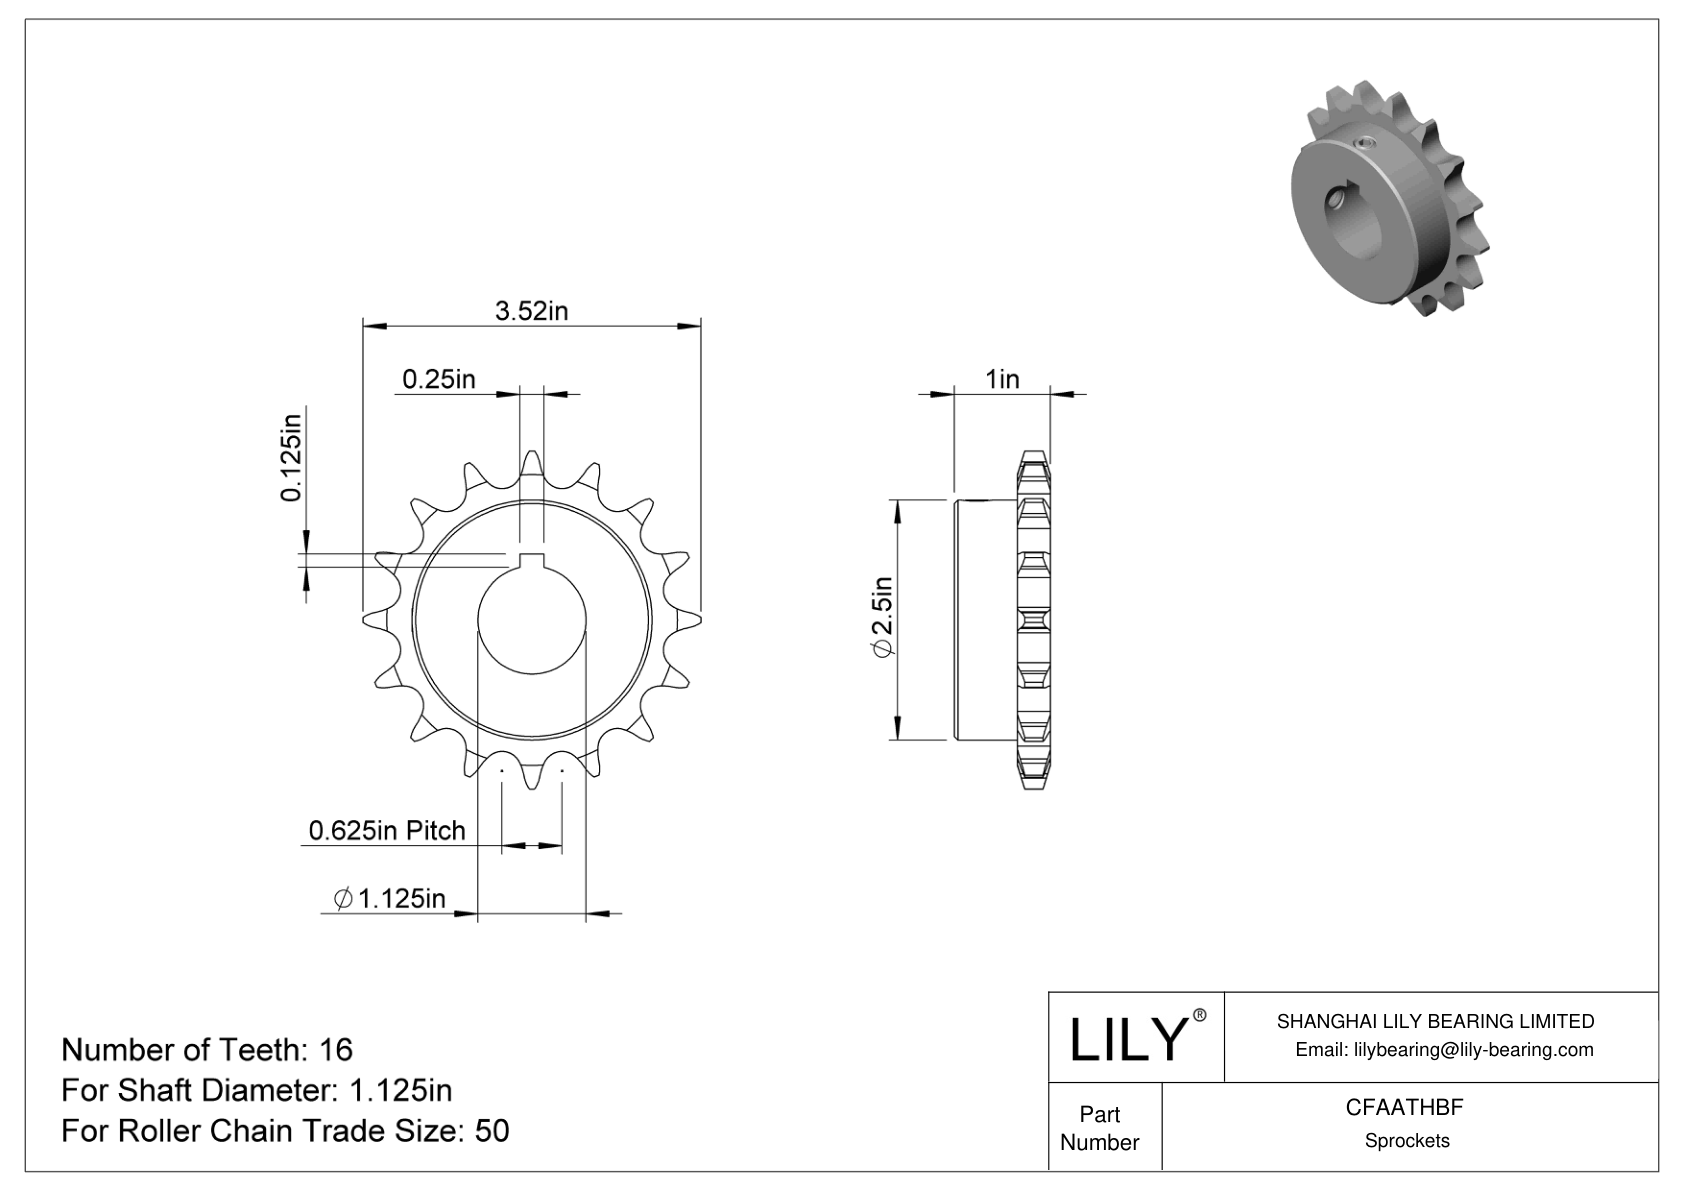 CFAATHBF Wear-Resistant Sprockets for ANSI Roller Chain cad drawing